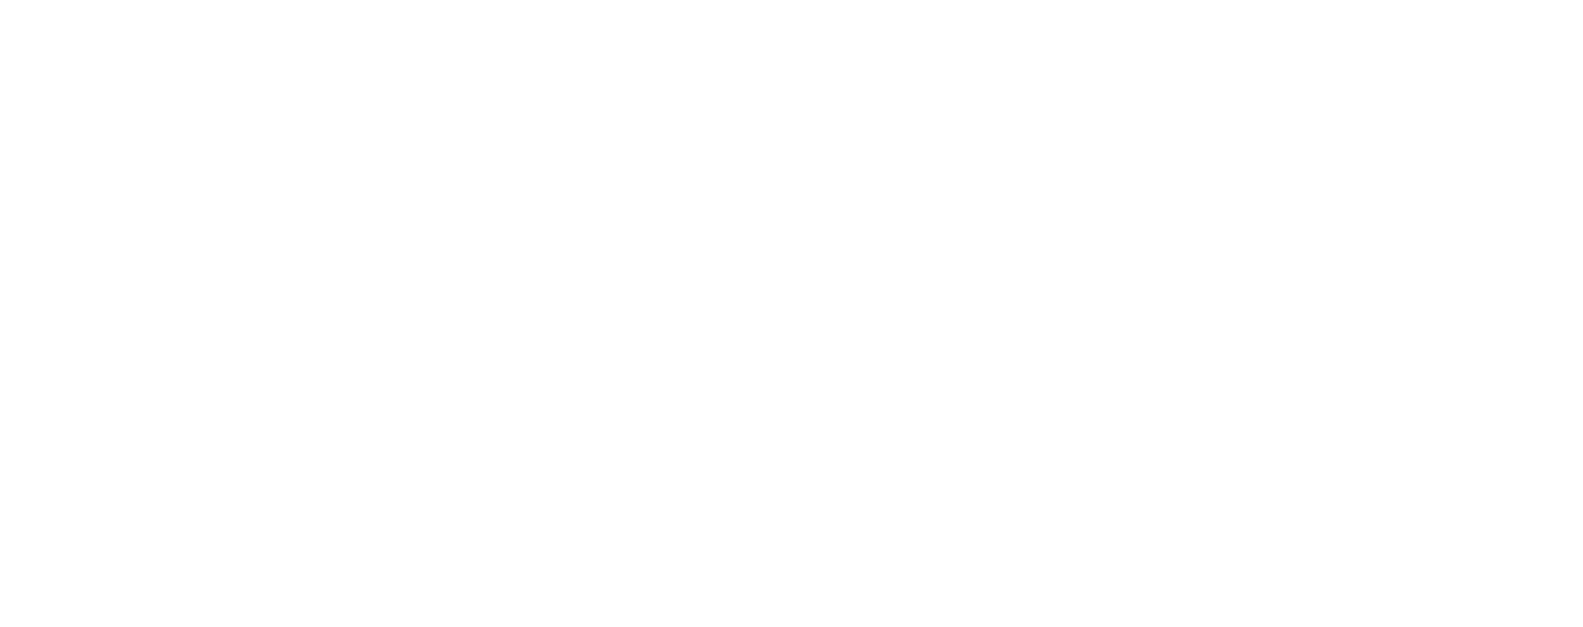 Your Hospitality Group